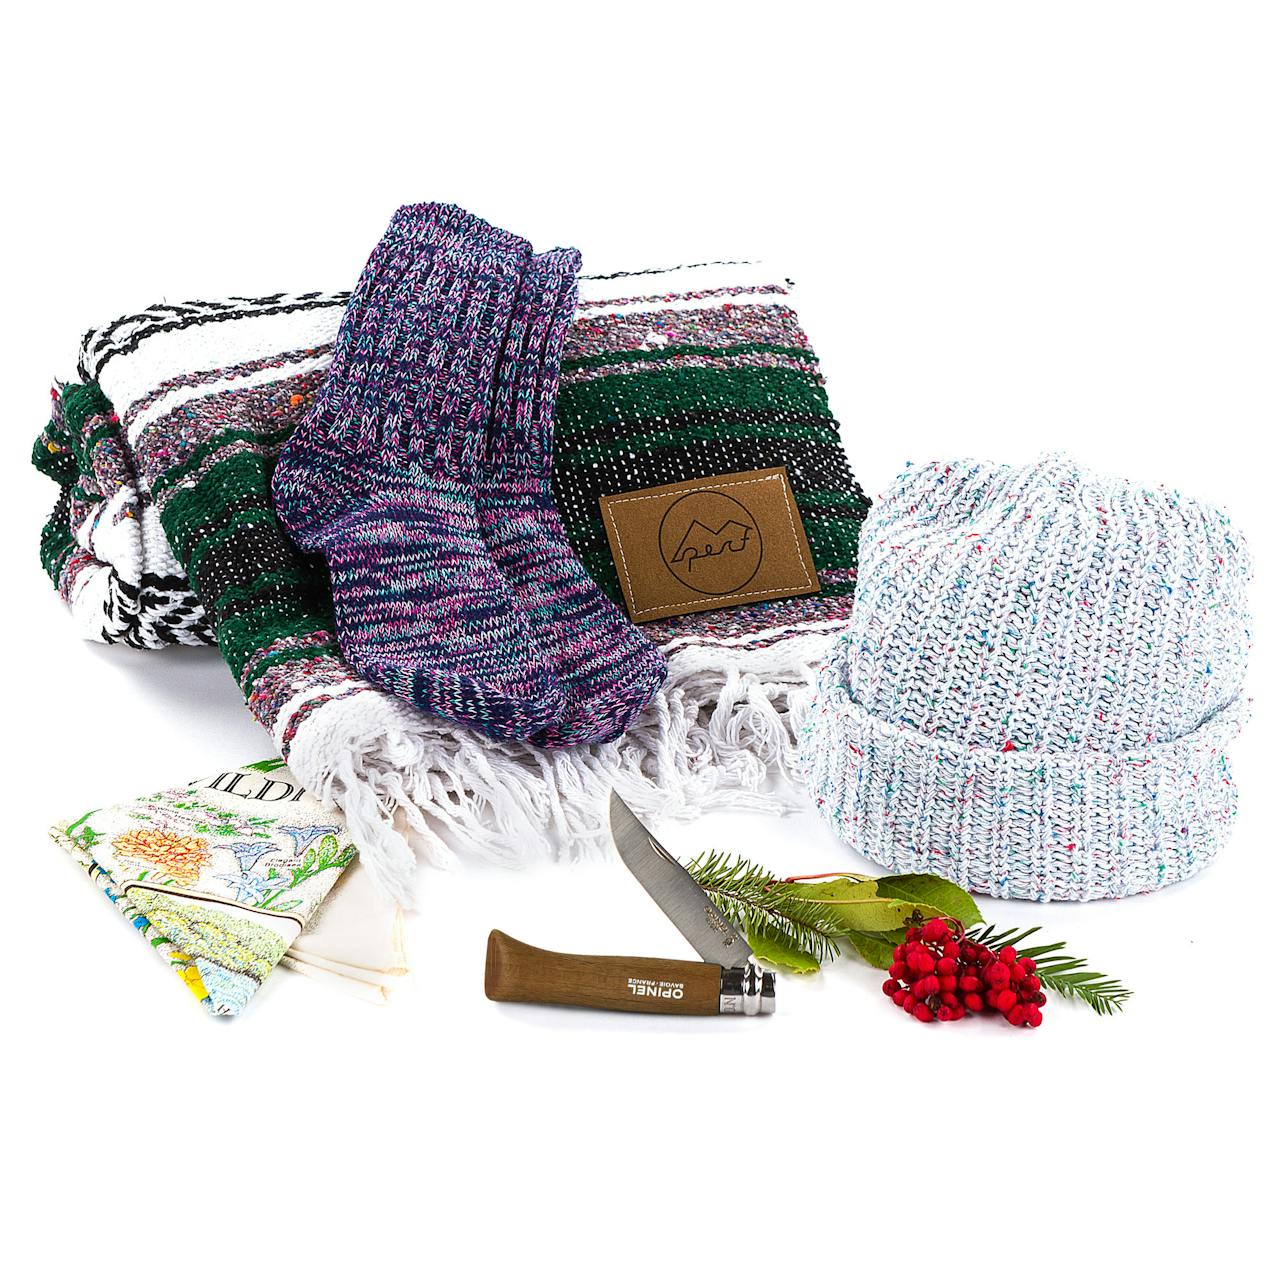 Huckberry Gift Sets "For Her" - Outdoor